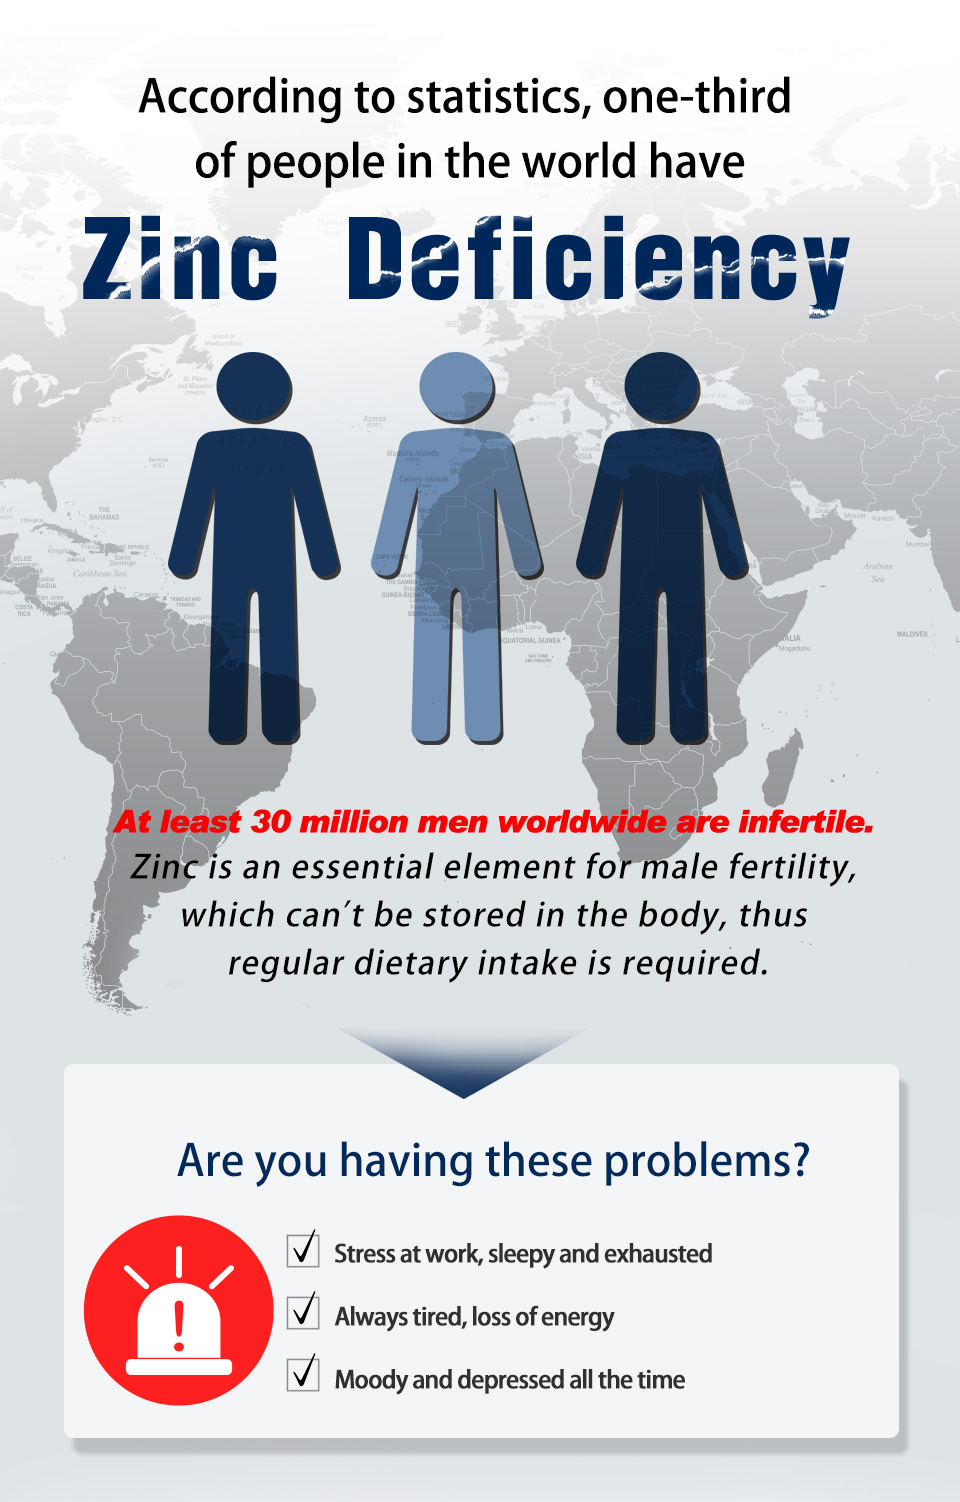 Zinc deficiency can lead to infertility, lowered motility, quantity and quality of man's reproductive ability 